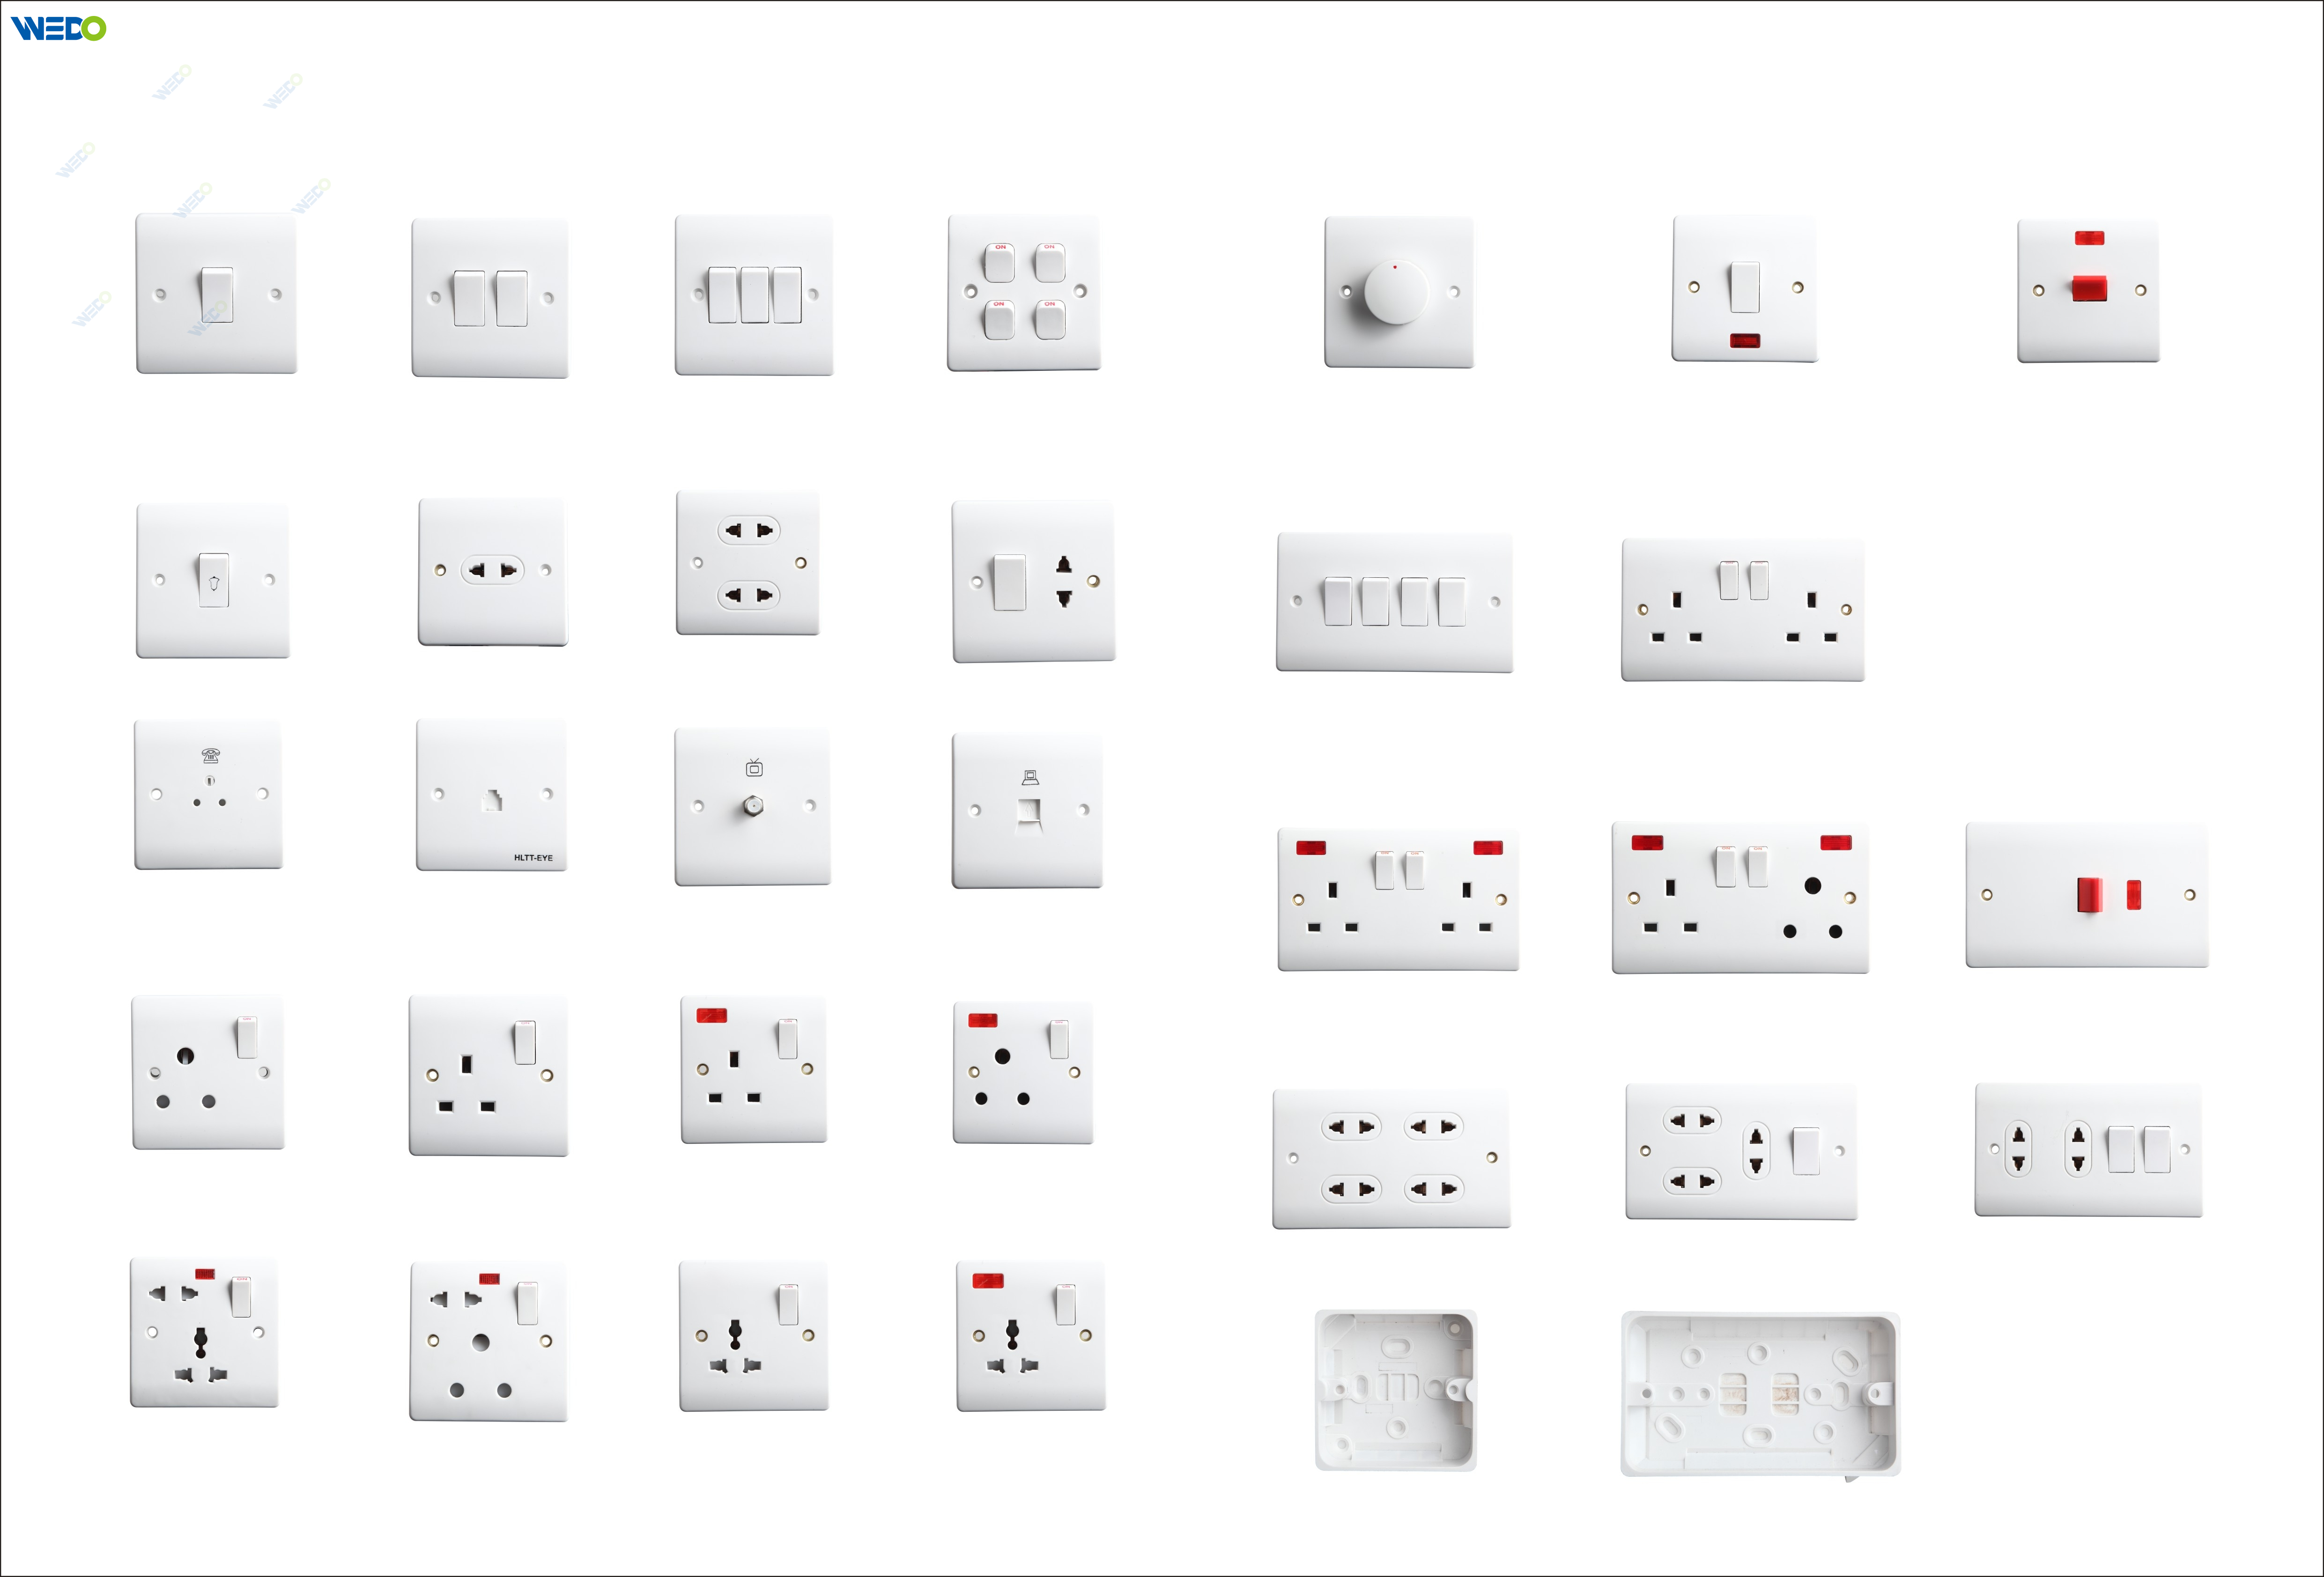 1Gang 6 Pin 16A Electrical Home Wall Switched Socket 